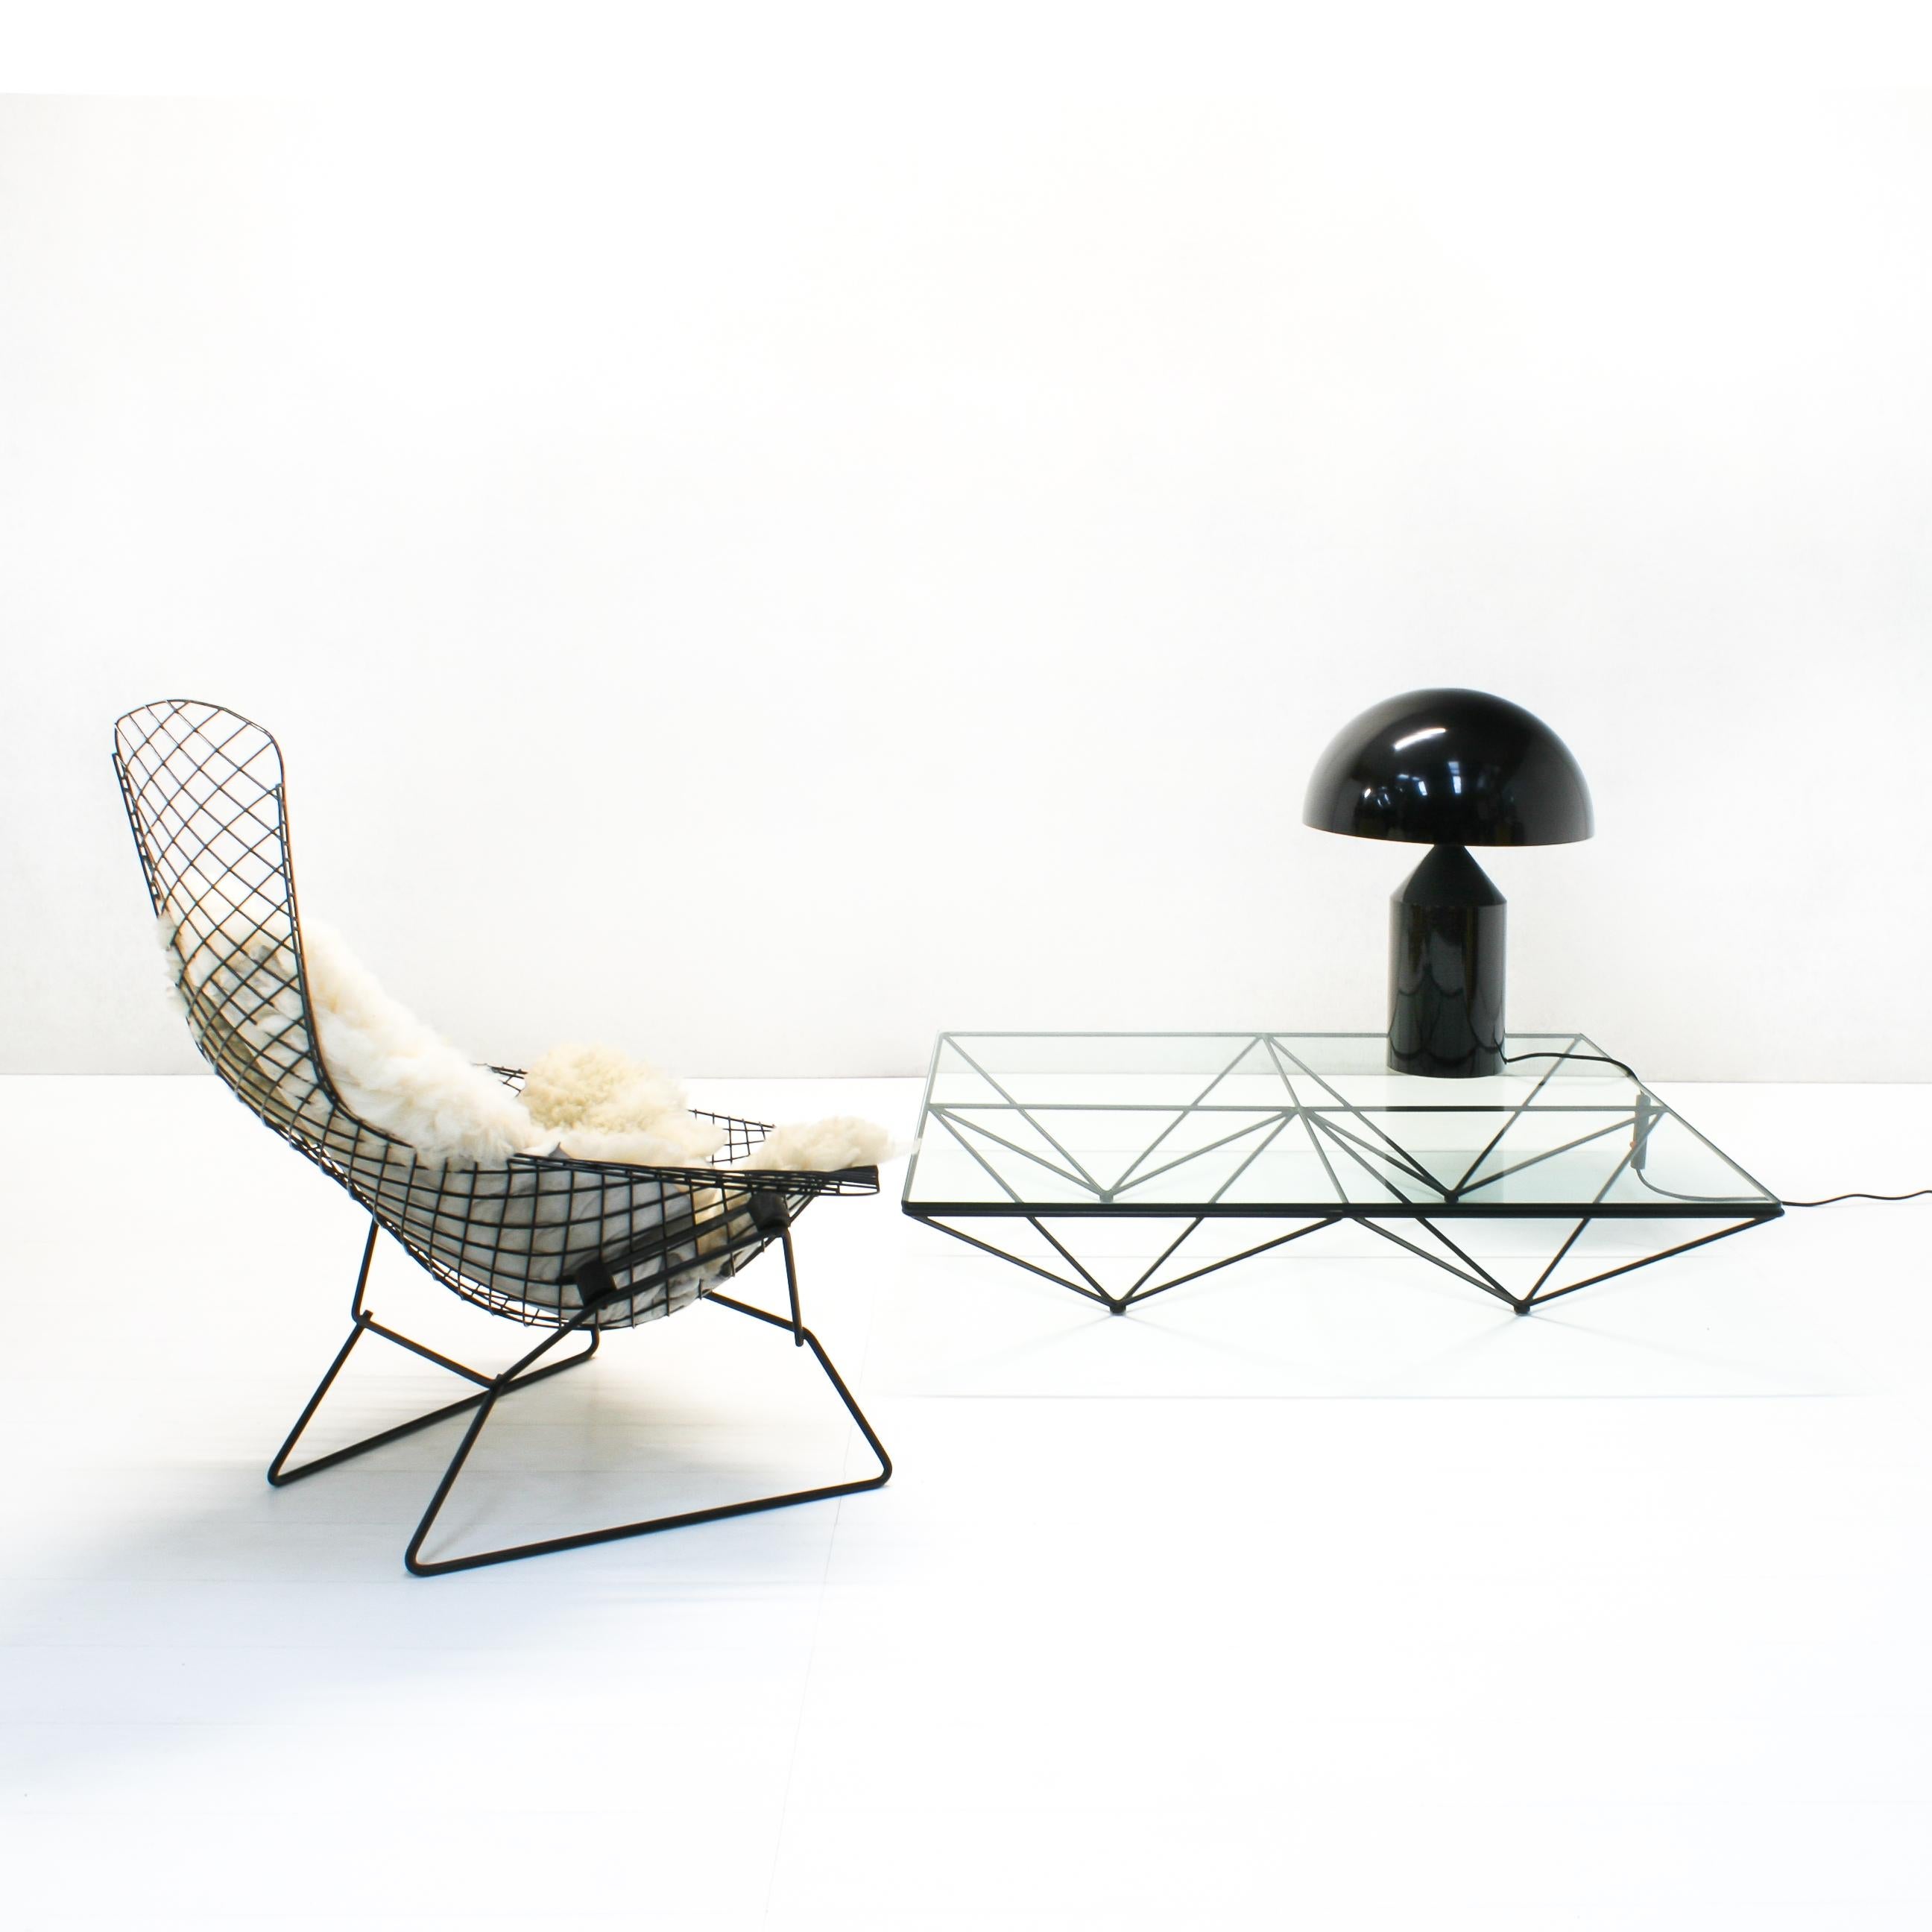 1970s production Bird Chair in black by Harry Bertoia for Knoll International. New rubber shockmounts were provided.